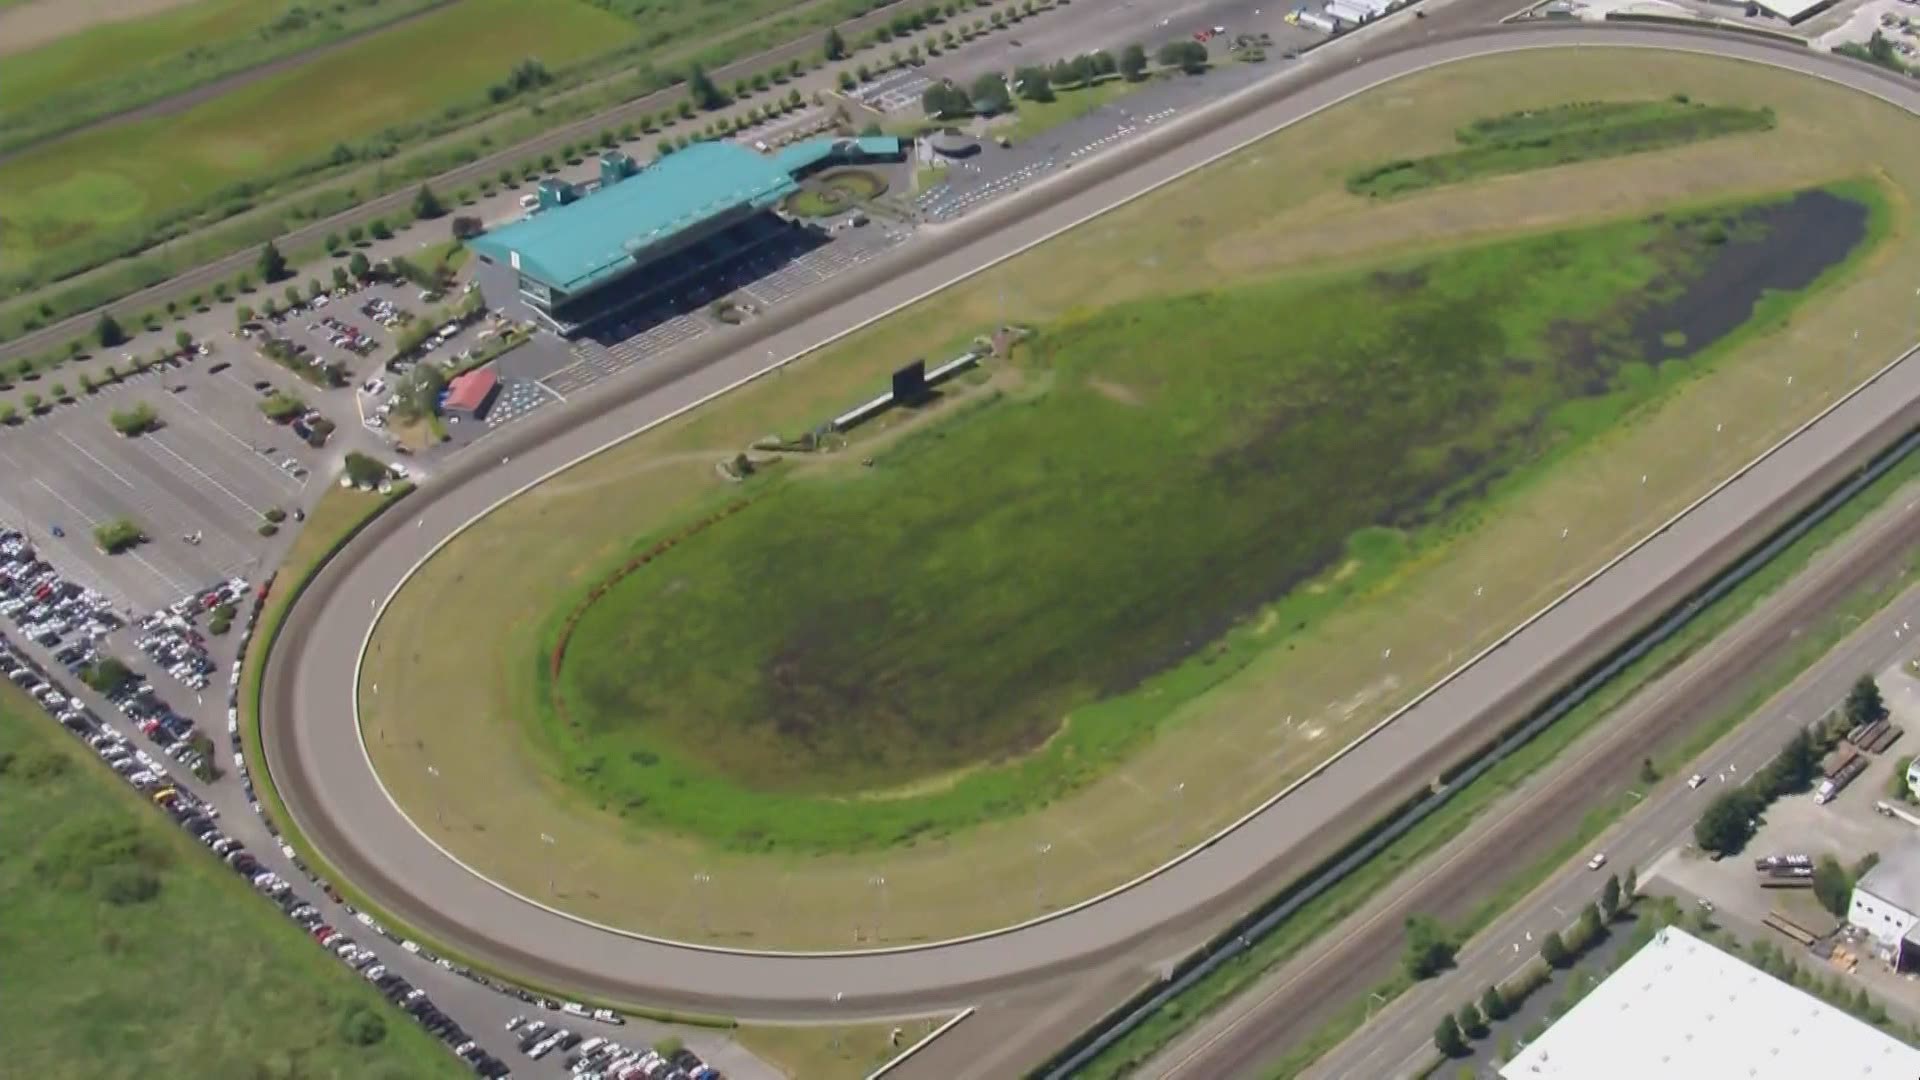 There will be no horse races on Sunday, June 27, at Emerald Downs due to the expected high temperatures in western Washington.